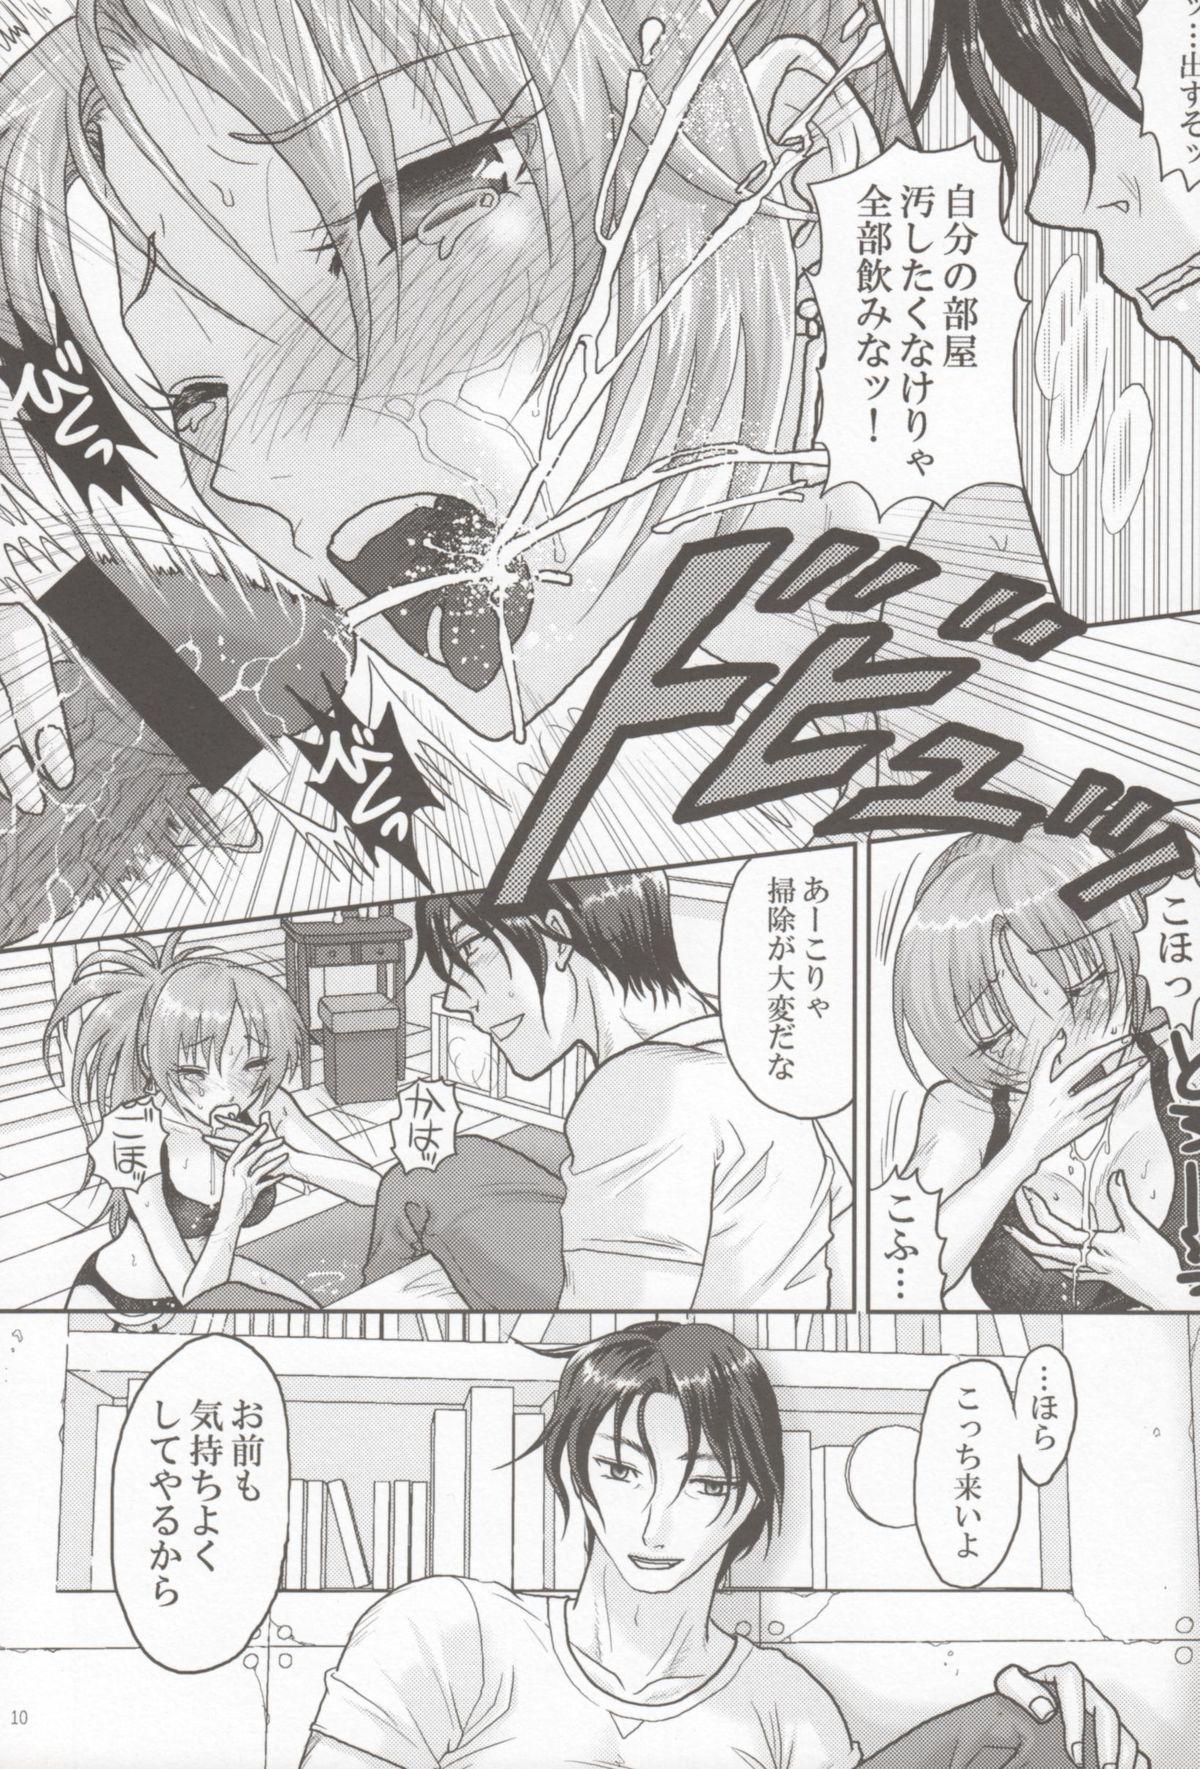 For nymphomania 5 - King of fighters Teenage Girl Porn - Page 8